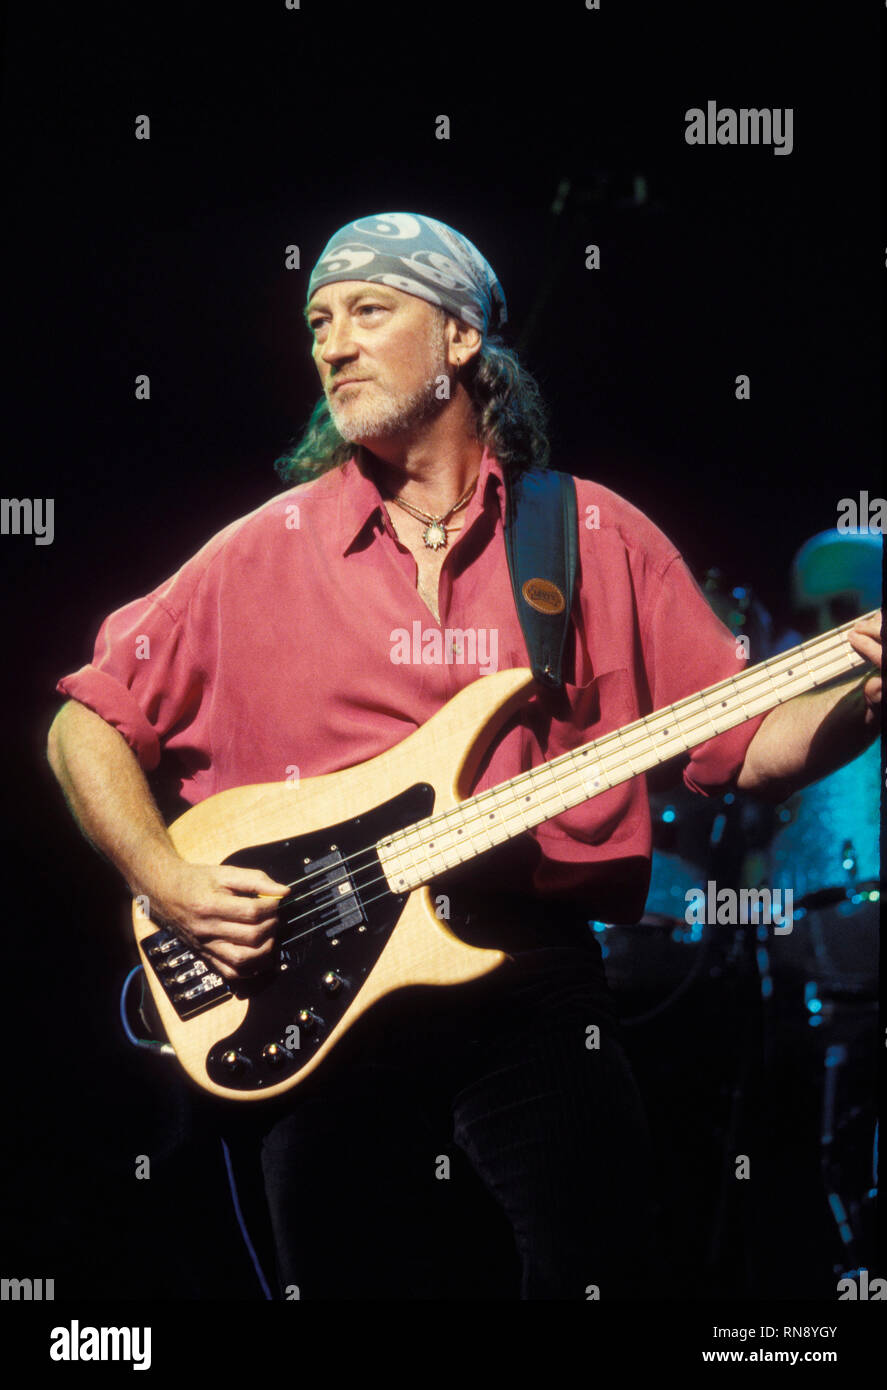 Deep Purple bassist Roger Glover is shown performing on stage during a 'live' concert appearance. Stock Photo